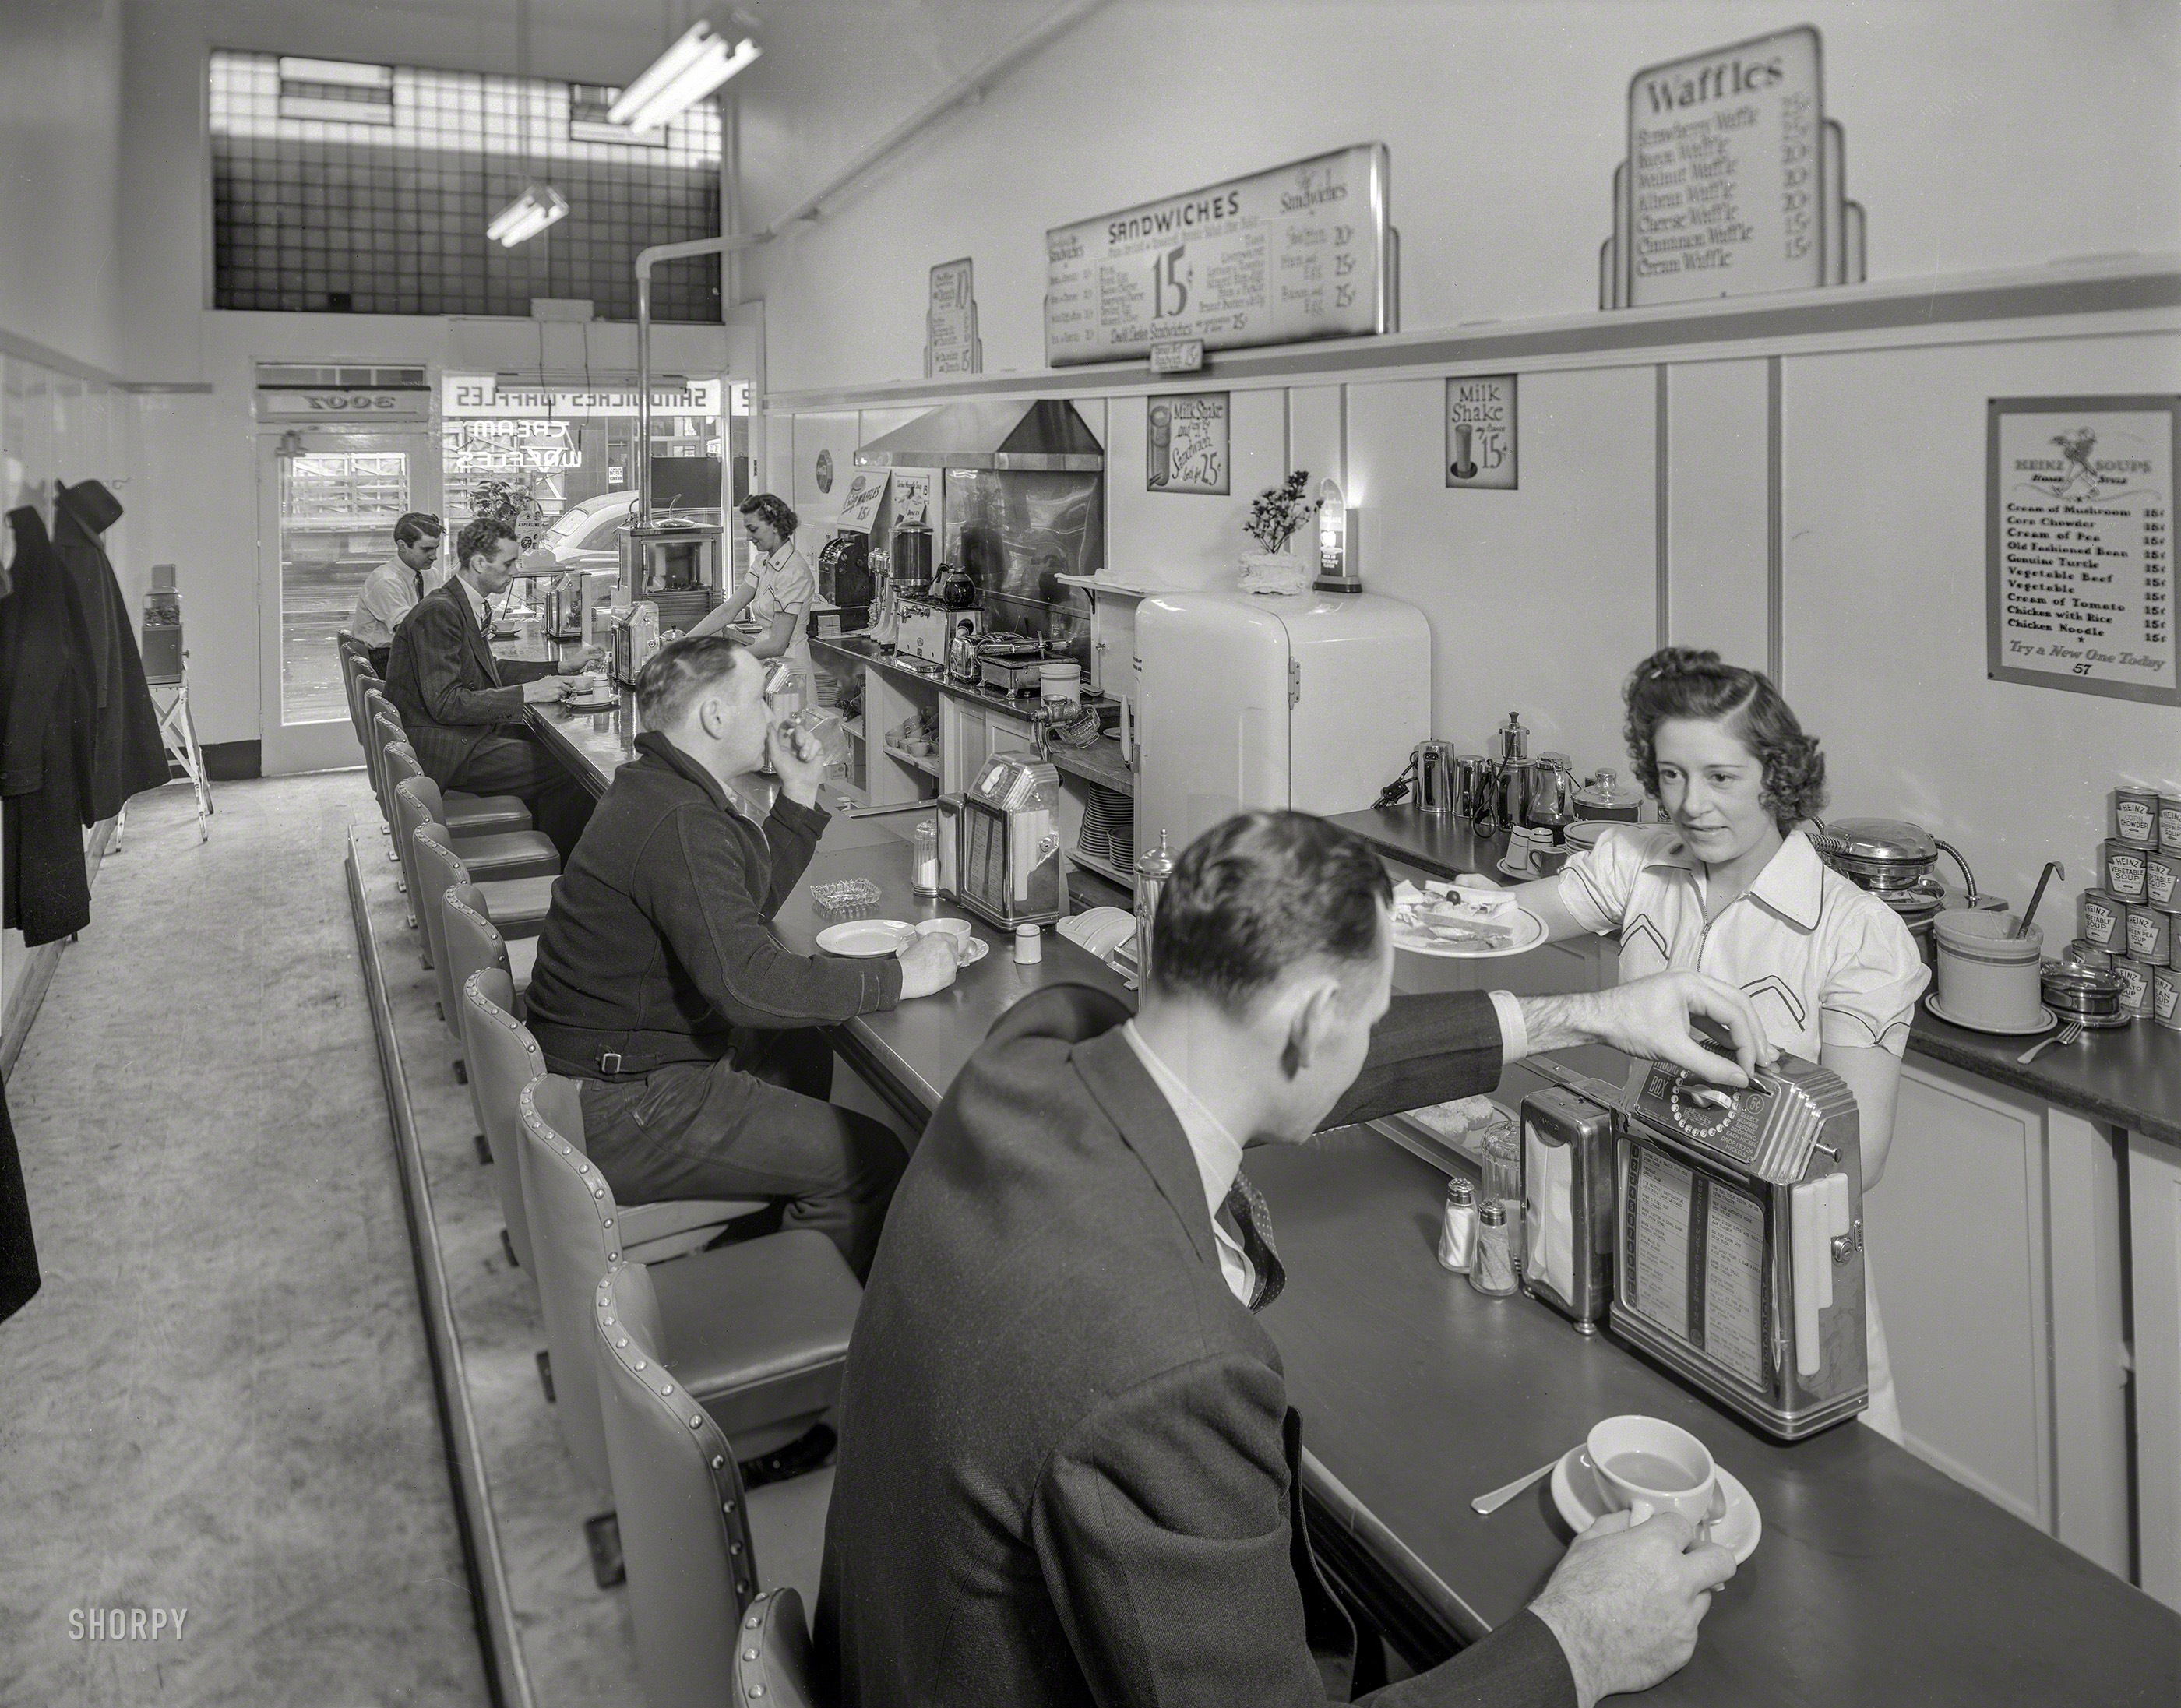 &nbsp; &nbsp; &nbsp; &nbsp; UPDATE: Restaurant ID courtesy of Sagitta.
San Francisco circa 1941. "Restaurant counter." And another shot of the Buckley Music System "Music Box." (Selection No. 1: "Three at a Table for Two" by Dick Todd.) 8x10 acetate negative, photographer unknown. View full size.